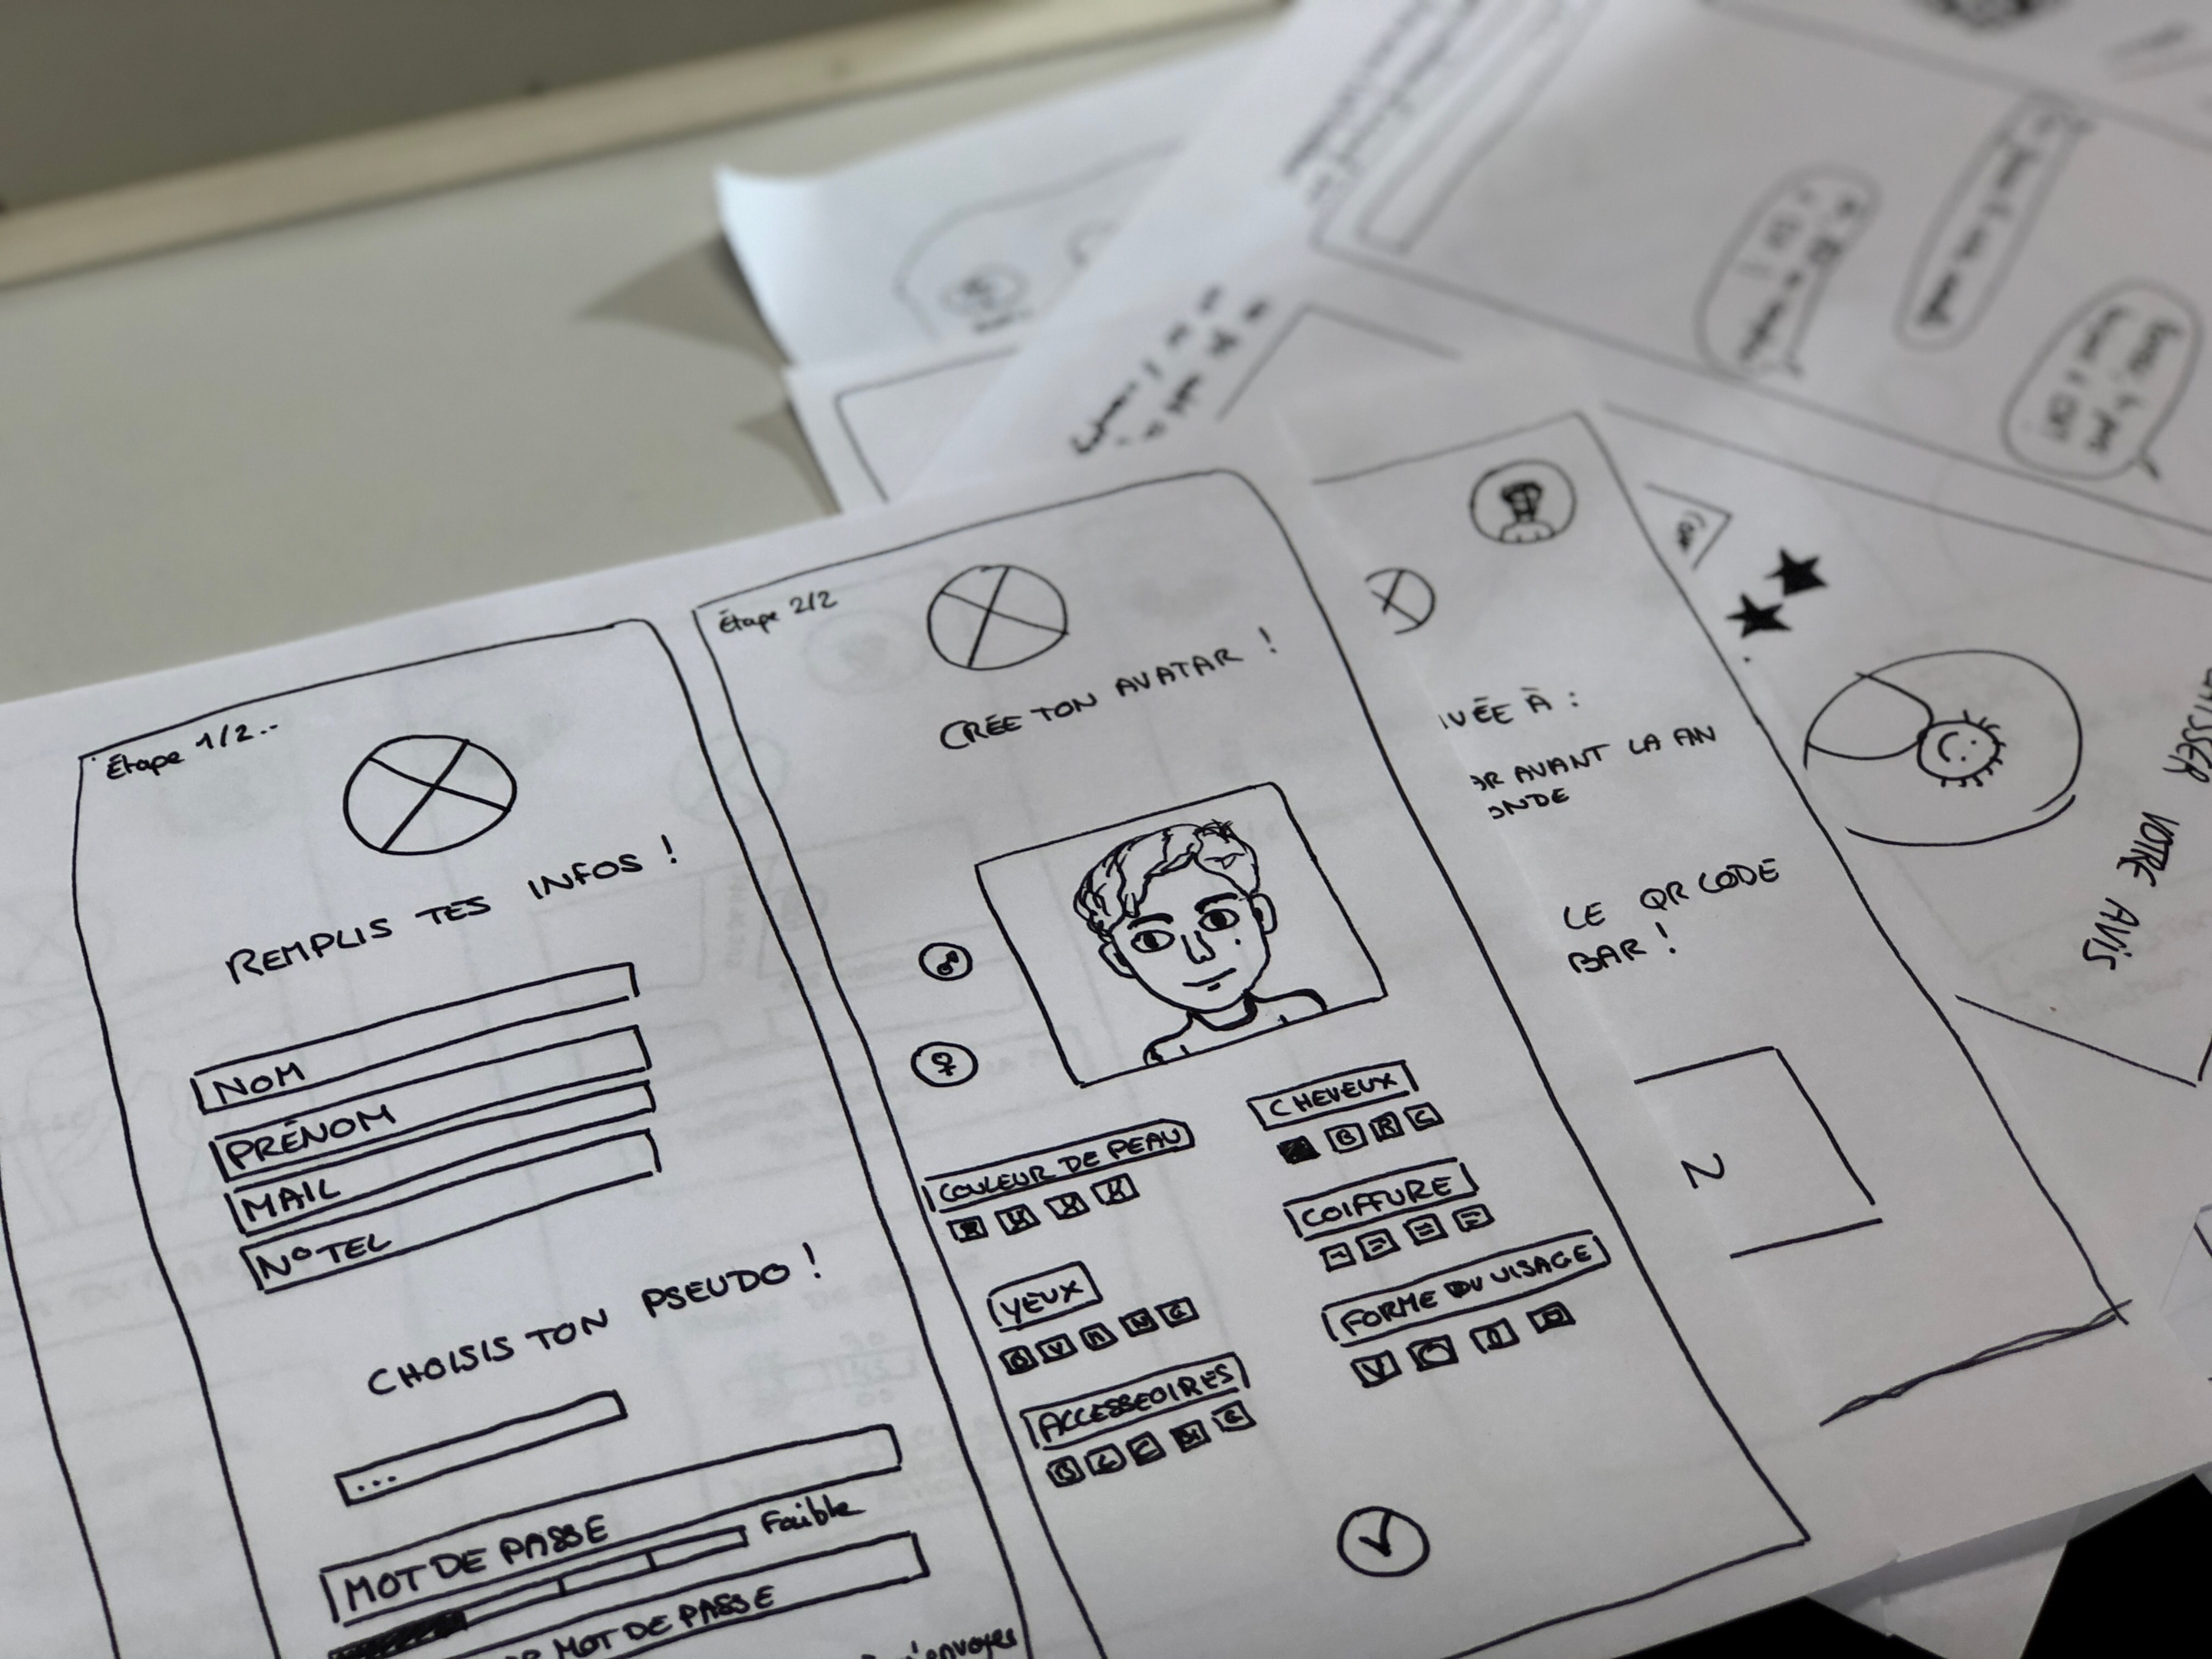 Why is UI/UX design good for business?